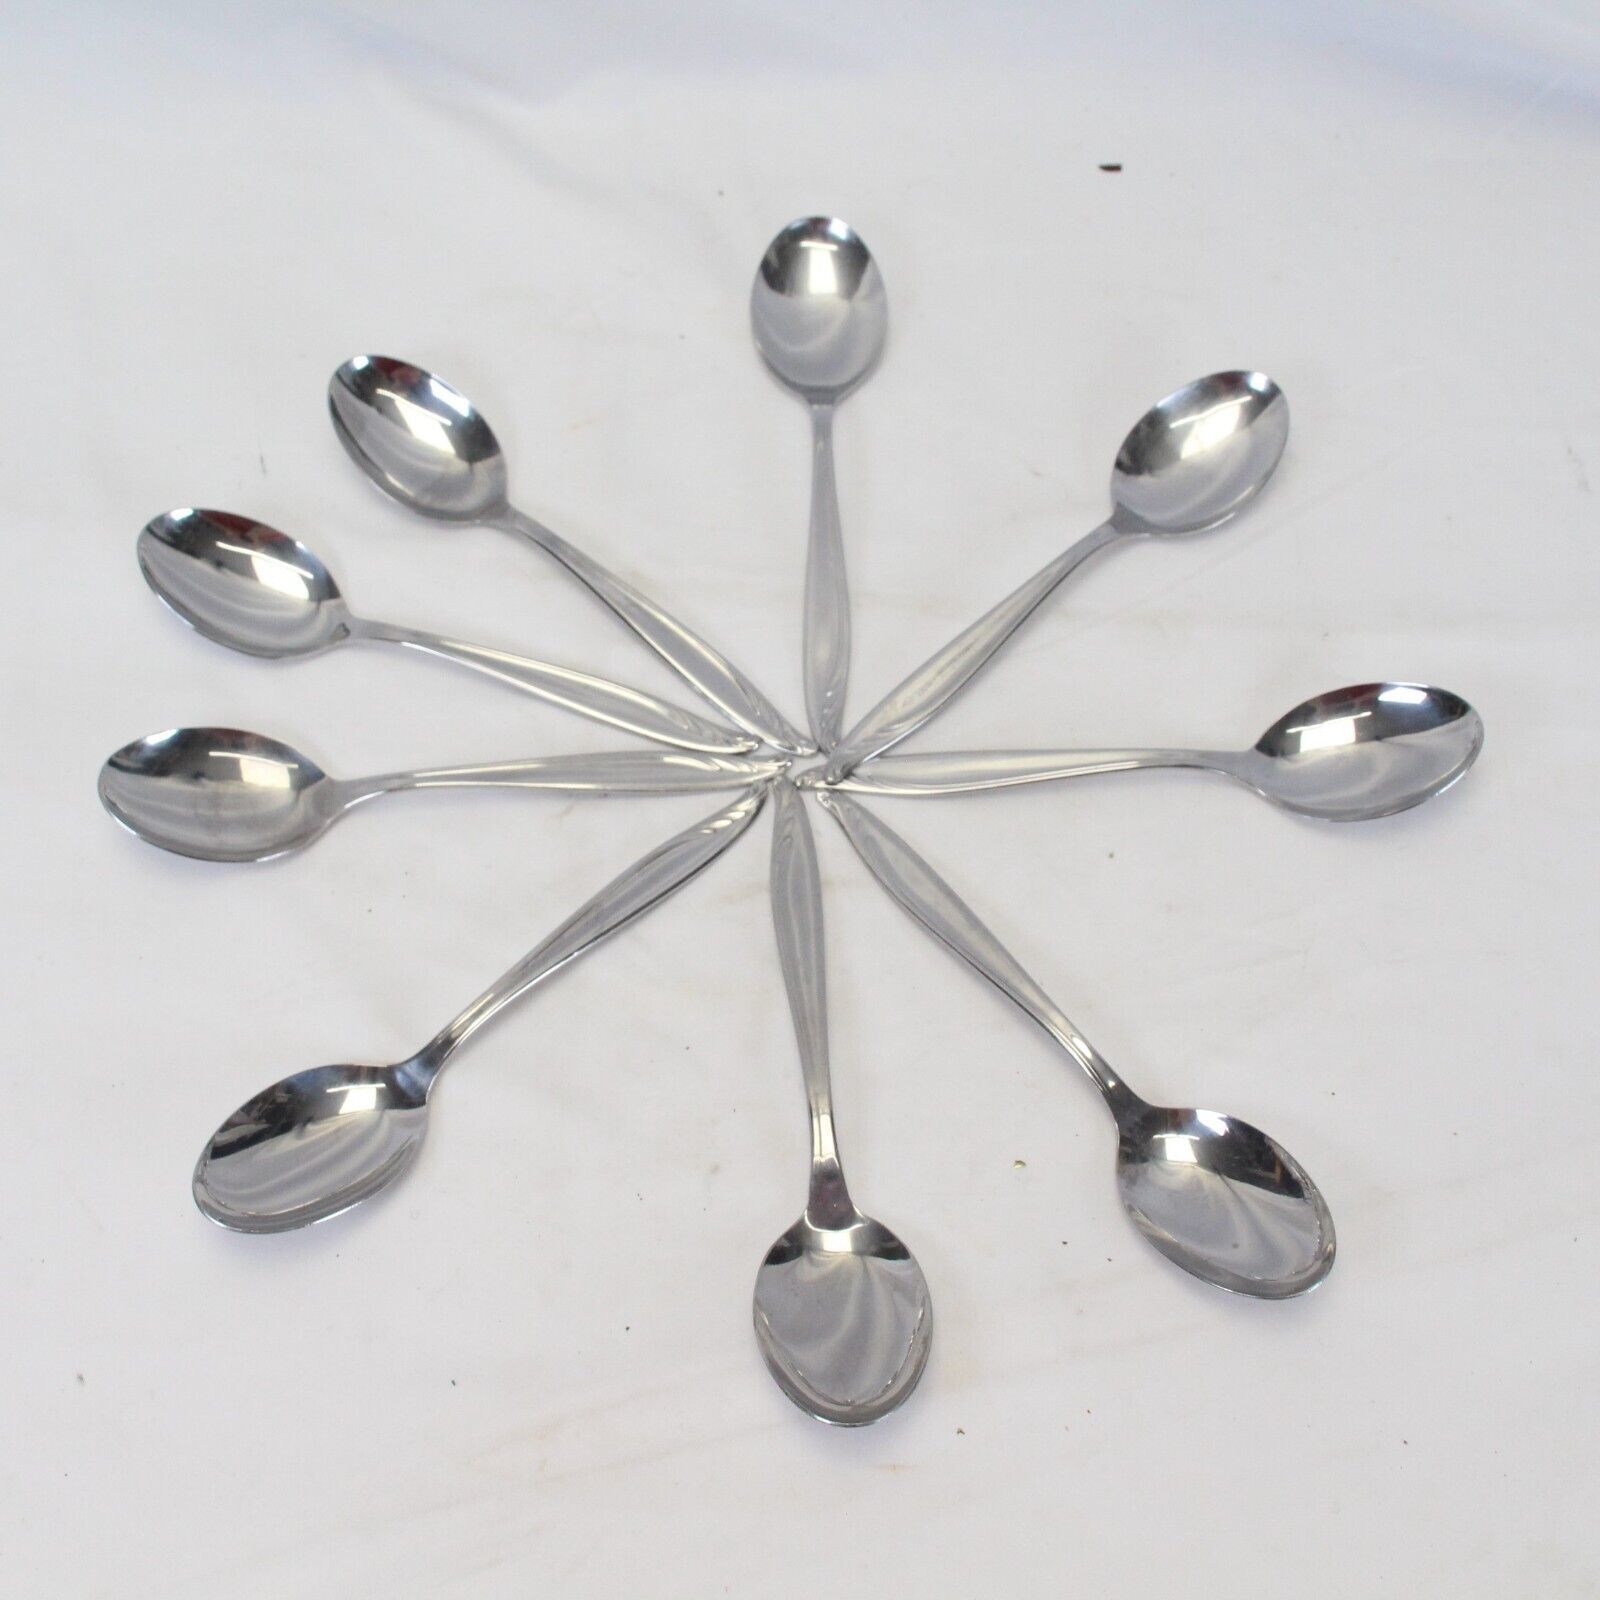 Wm Rogers Bermuda Oval Soup Spoons Stainless 6.75" Lot of 9 - $27.43